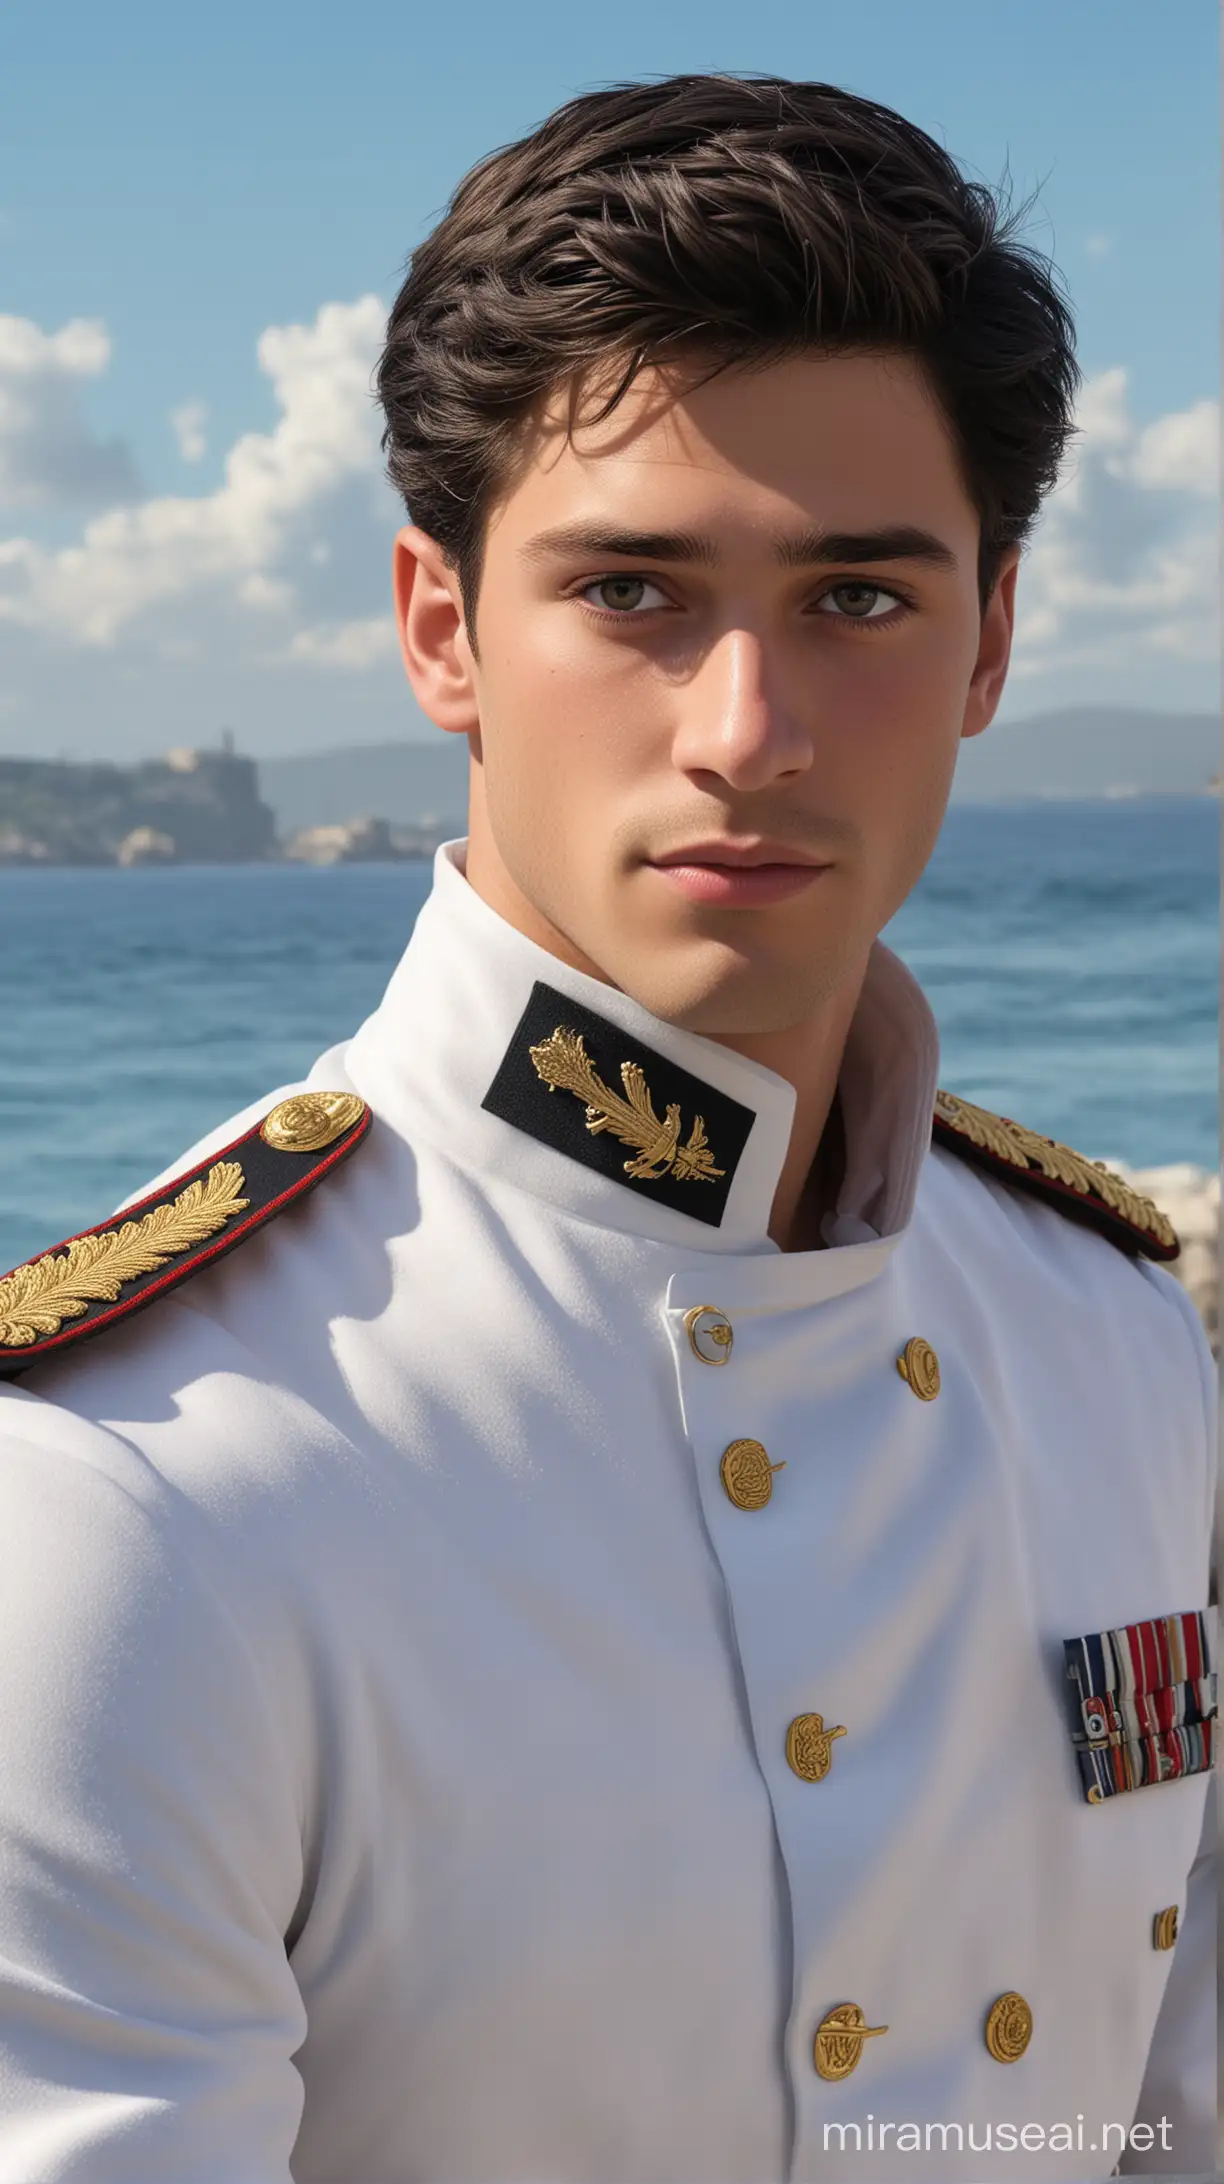 Disney Prince Henry of France in Military Uniform Against Natural Sea Background